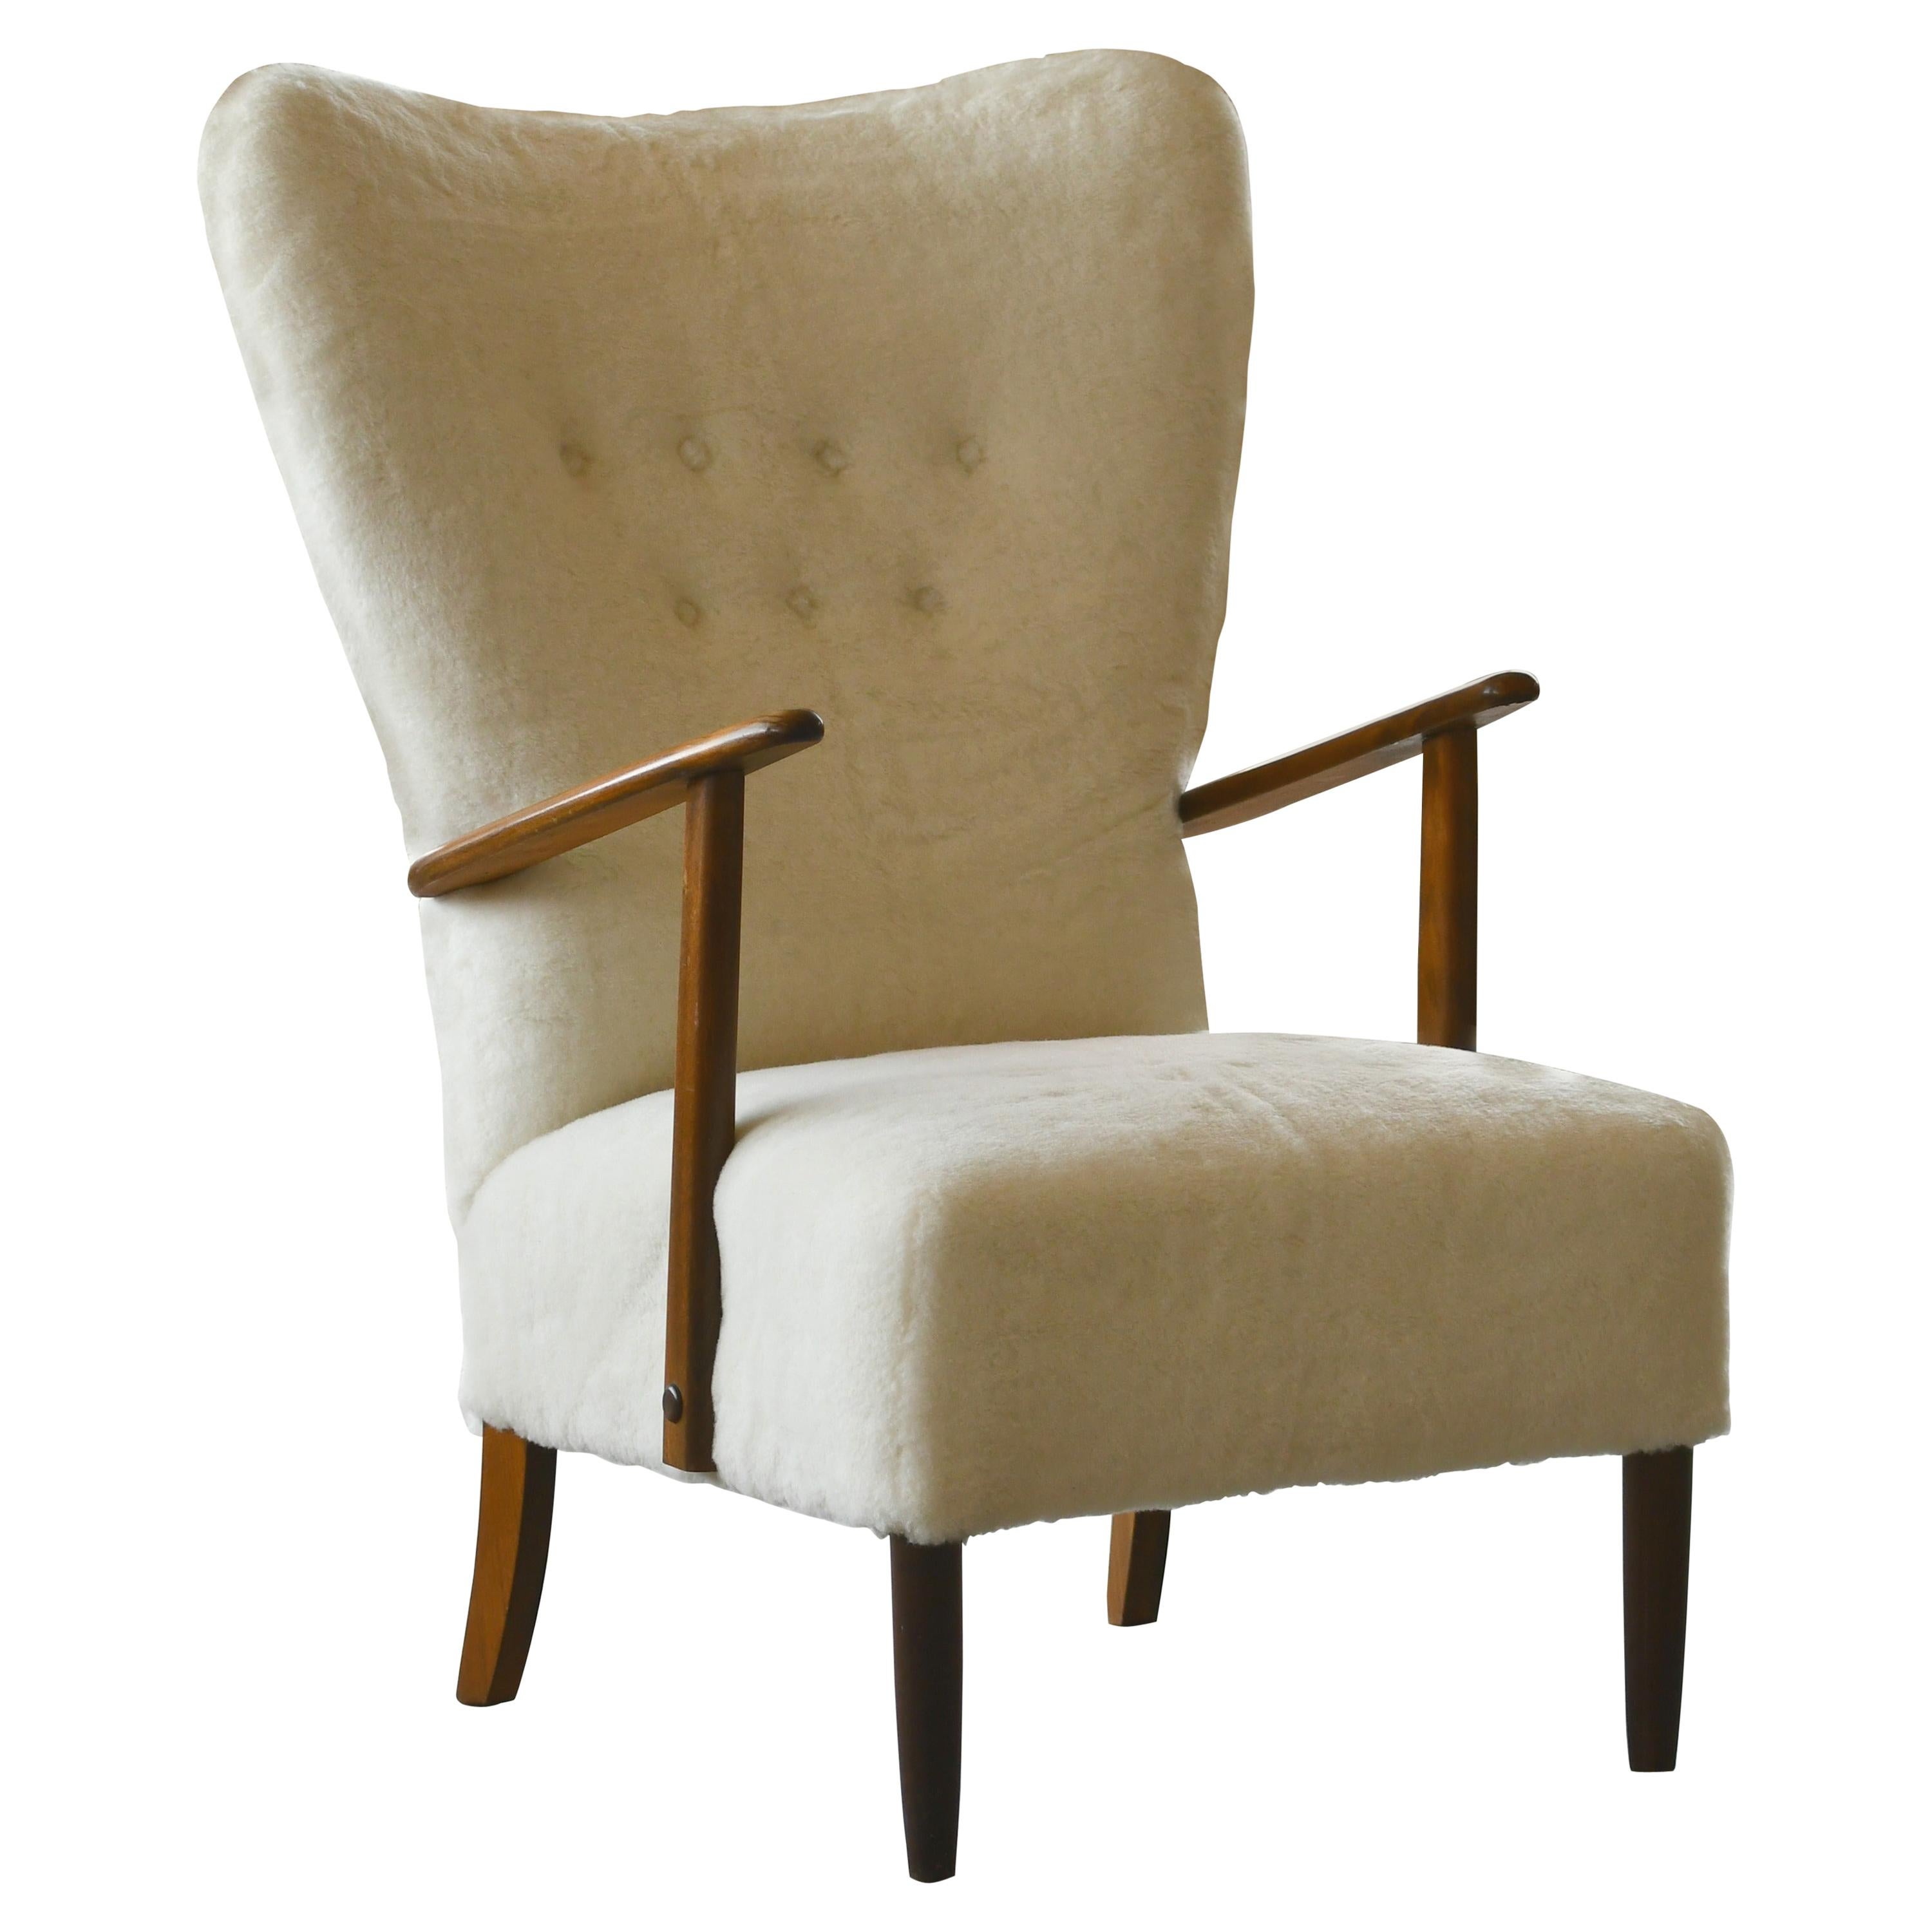 Danish 1950s Highback Lounge Chair Newly Upholstered in Lambswool